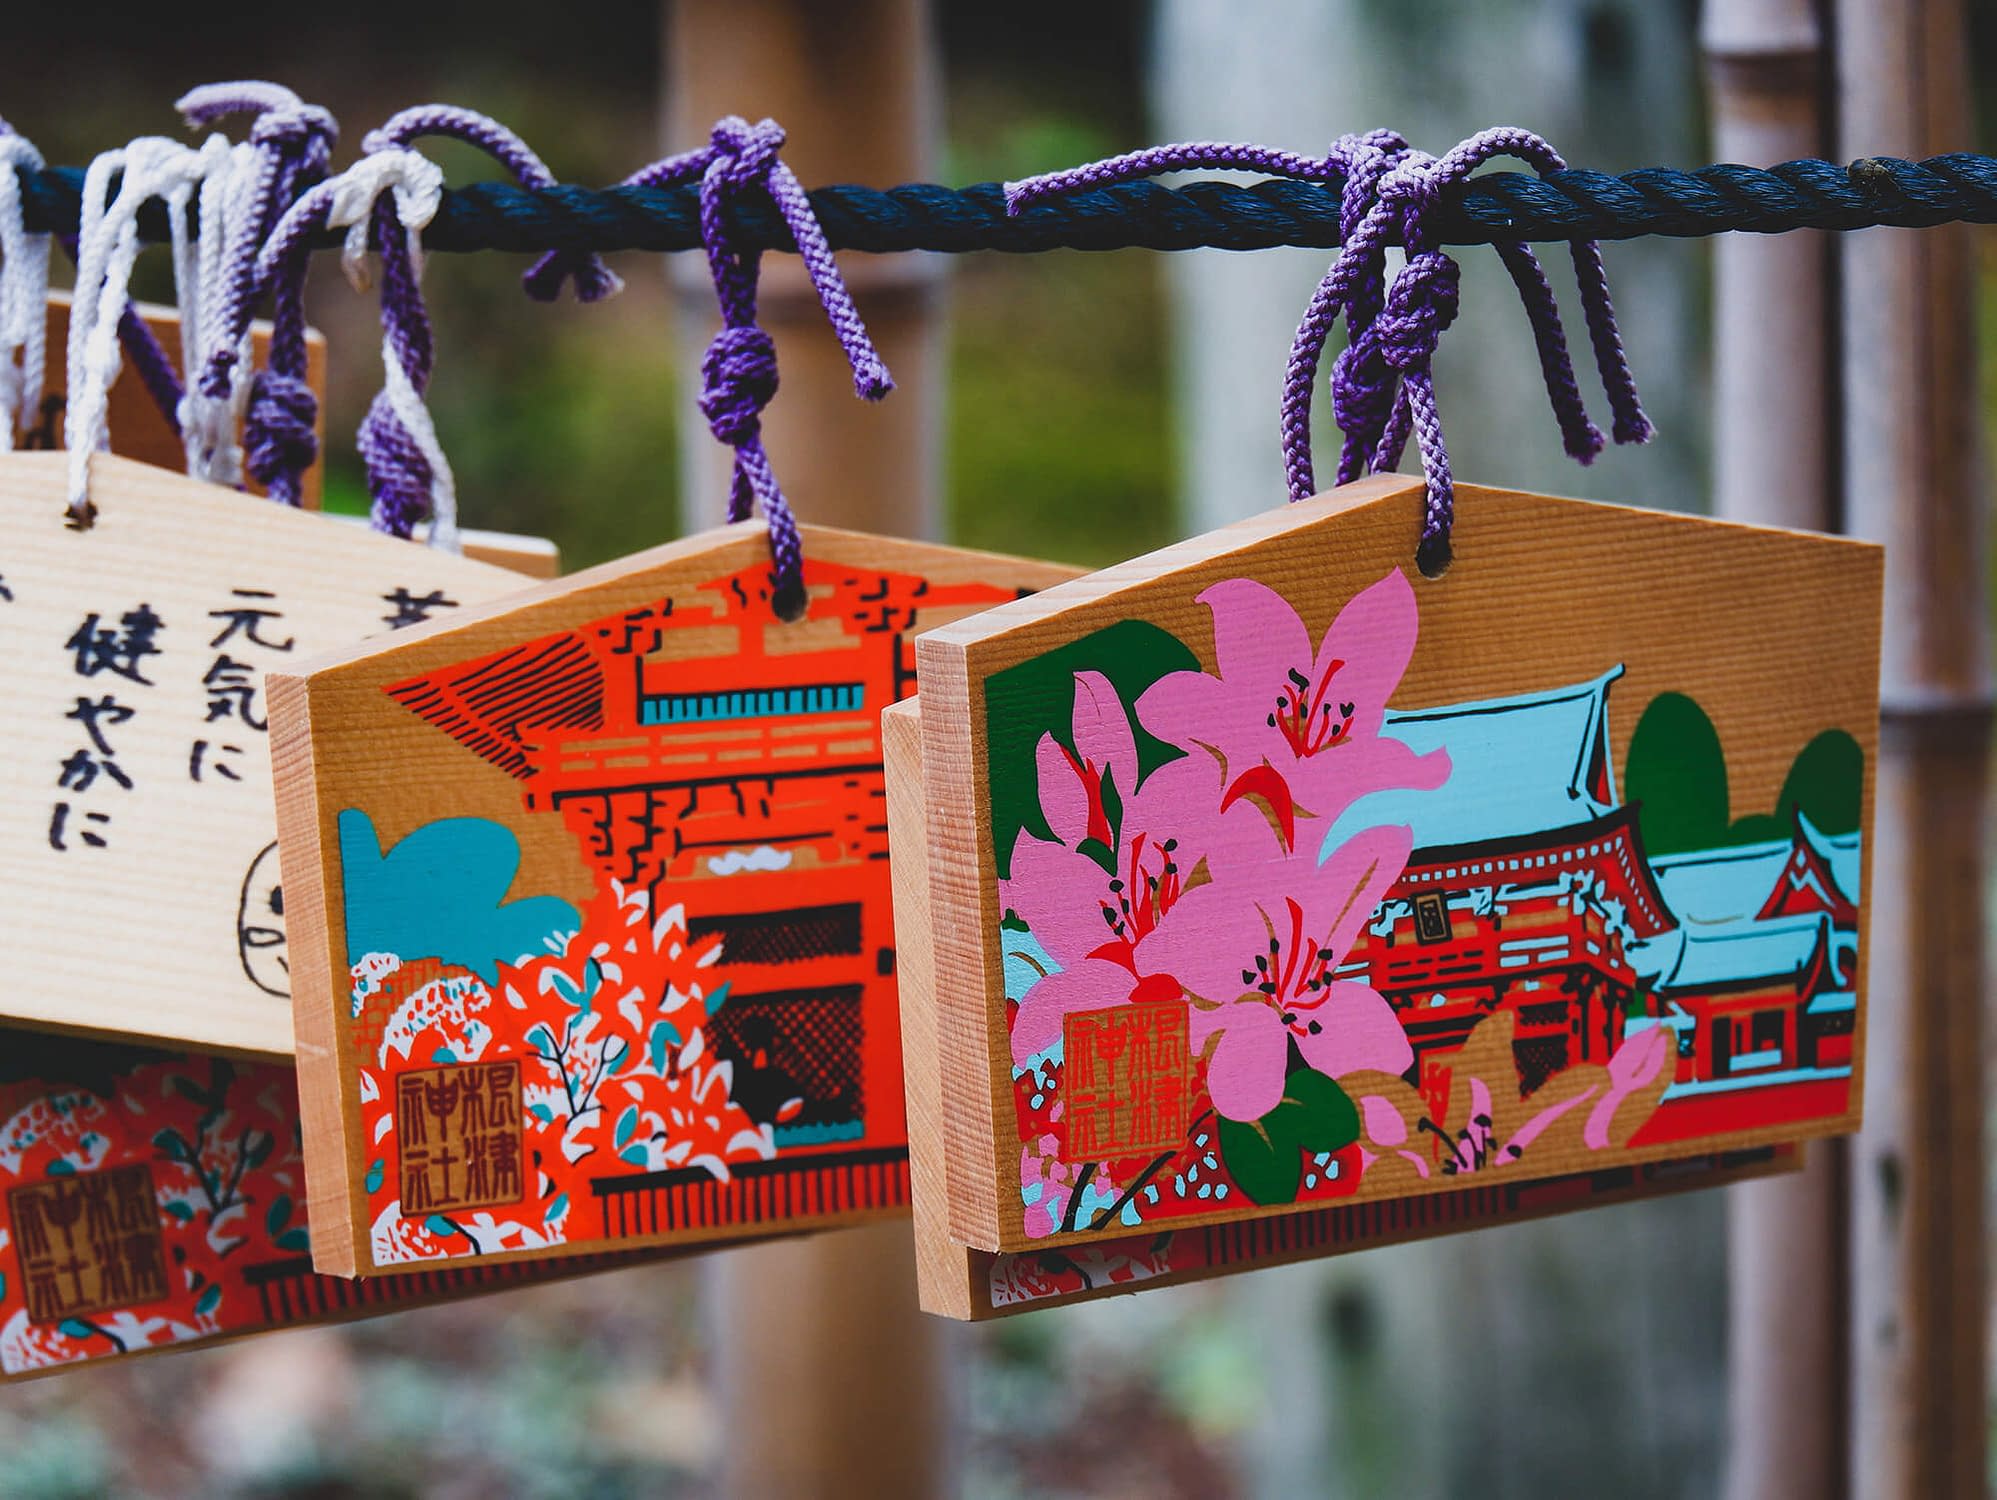 Painted wooden slates (ema) at a Japanese shrine